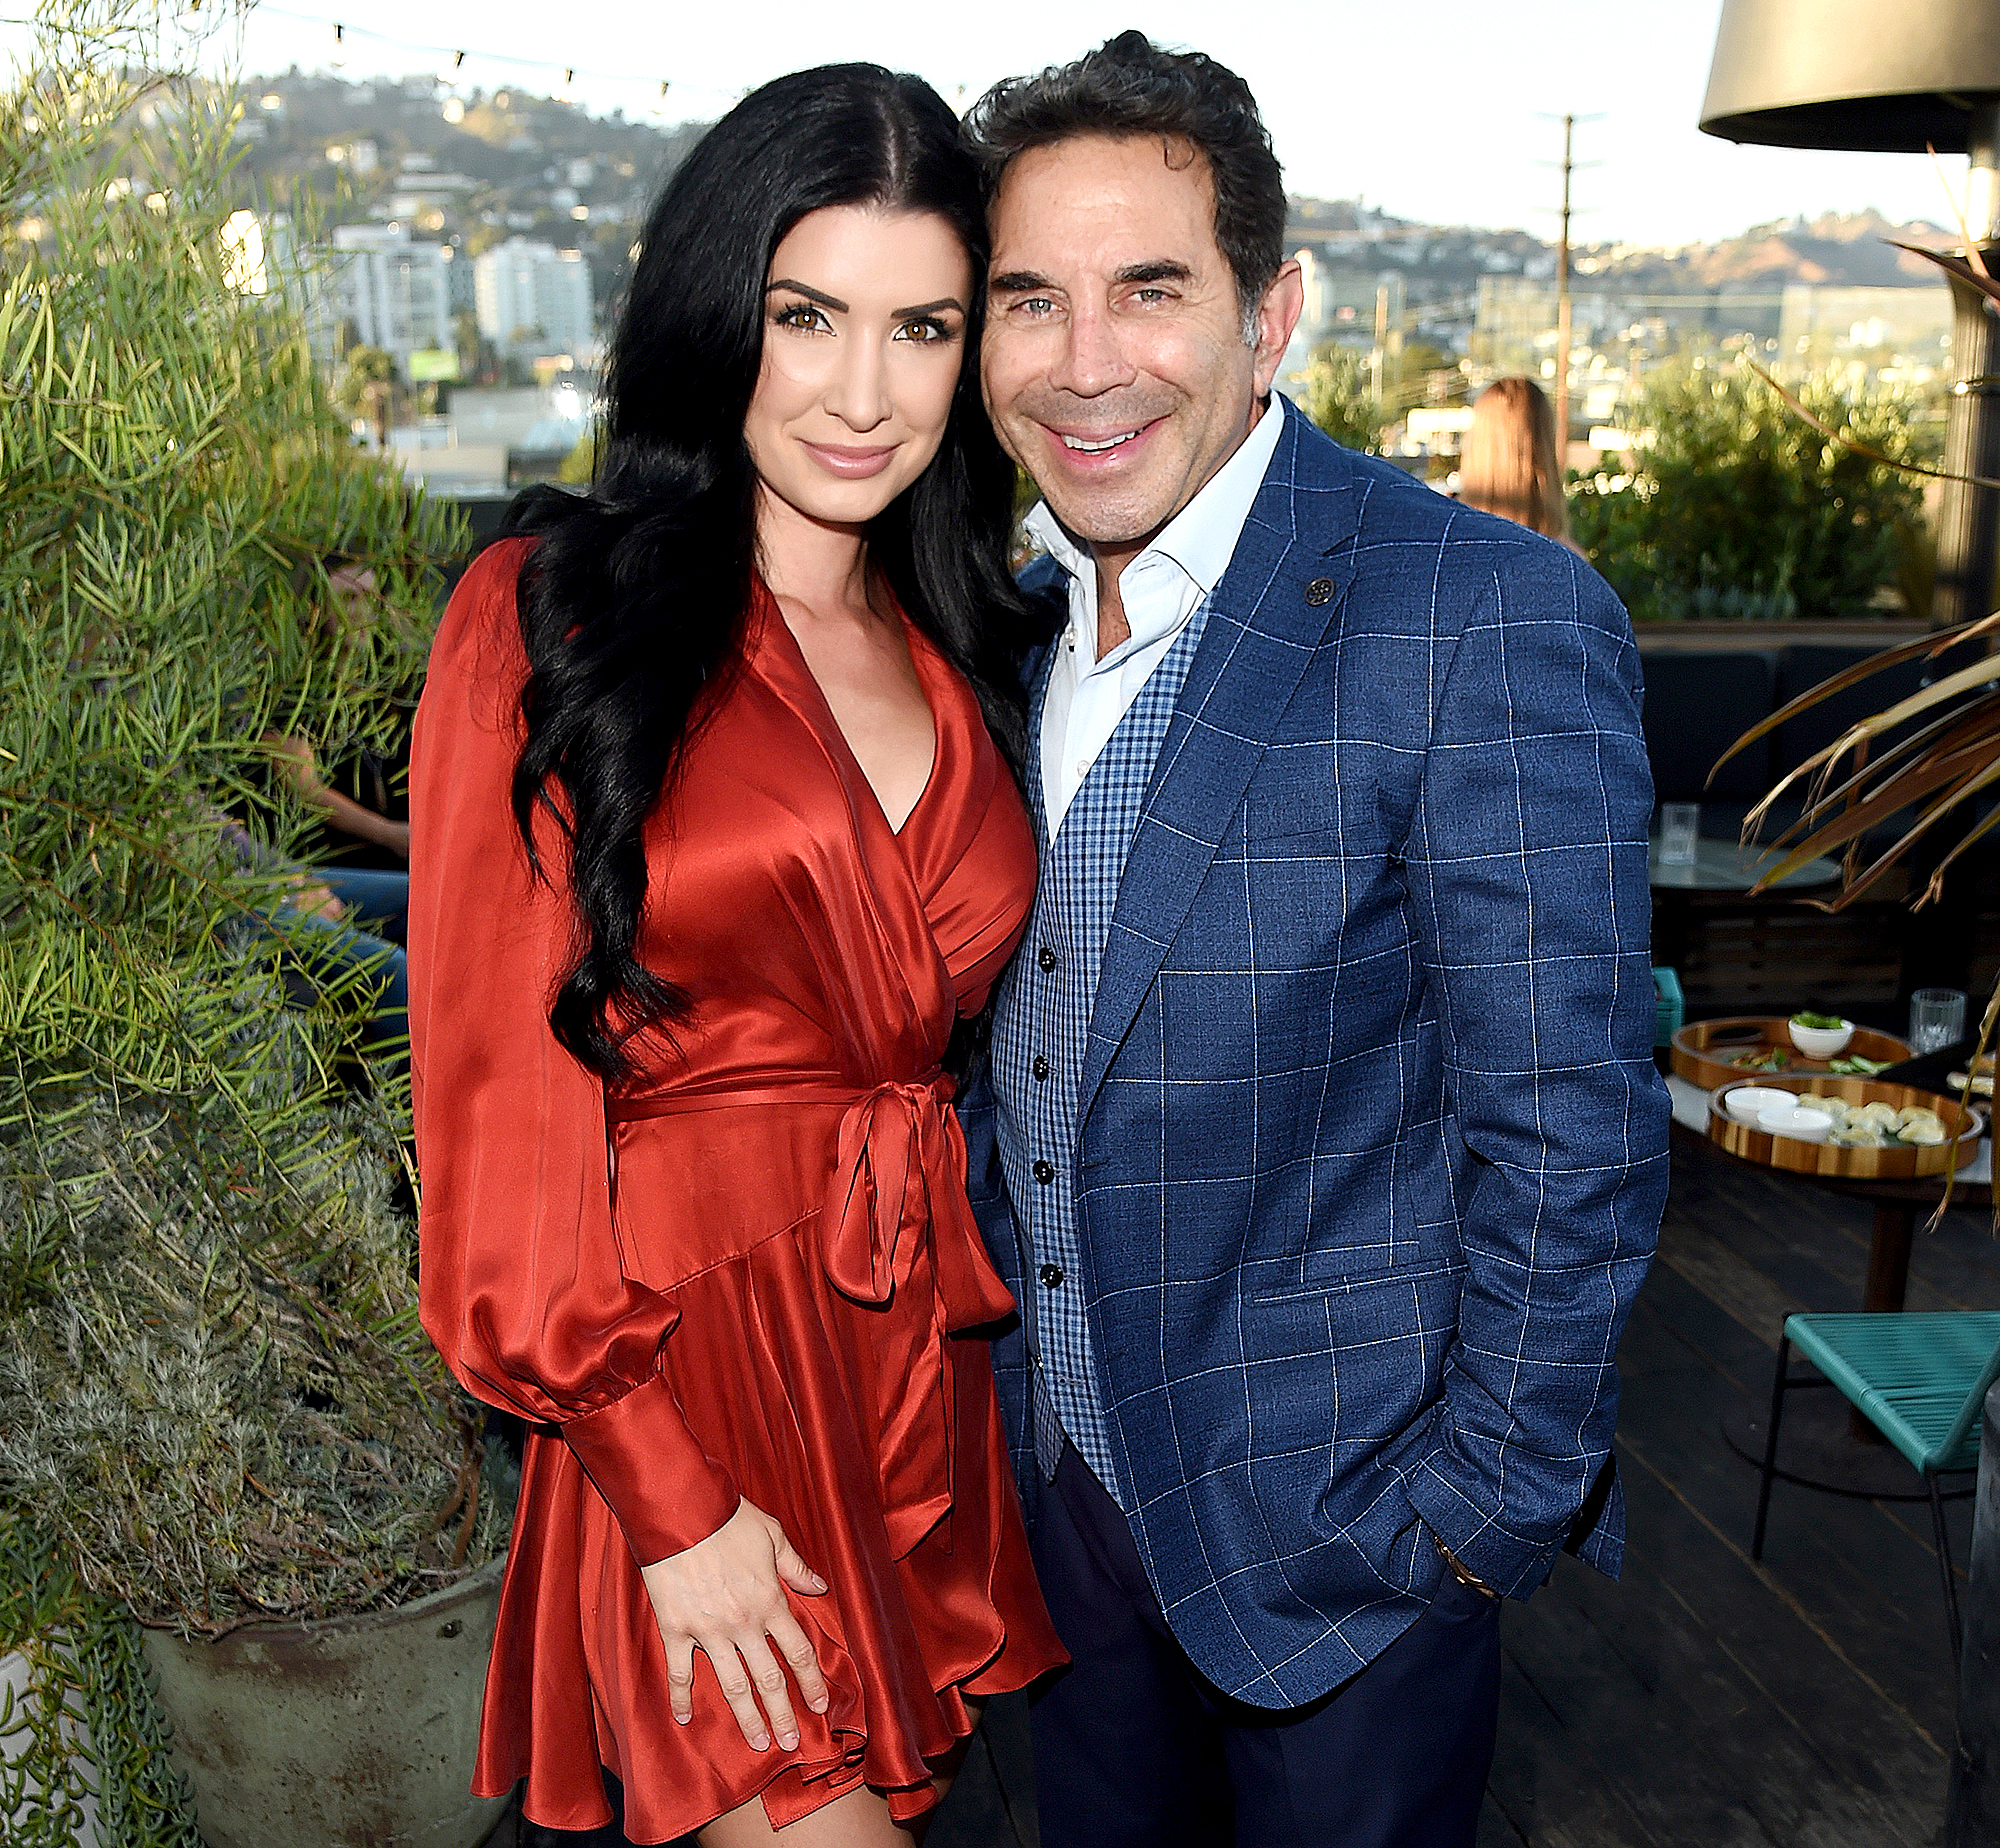 Dr Paul Nassif And Wife Brittany Pattakos Plan On ‘expanding The